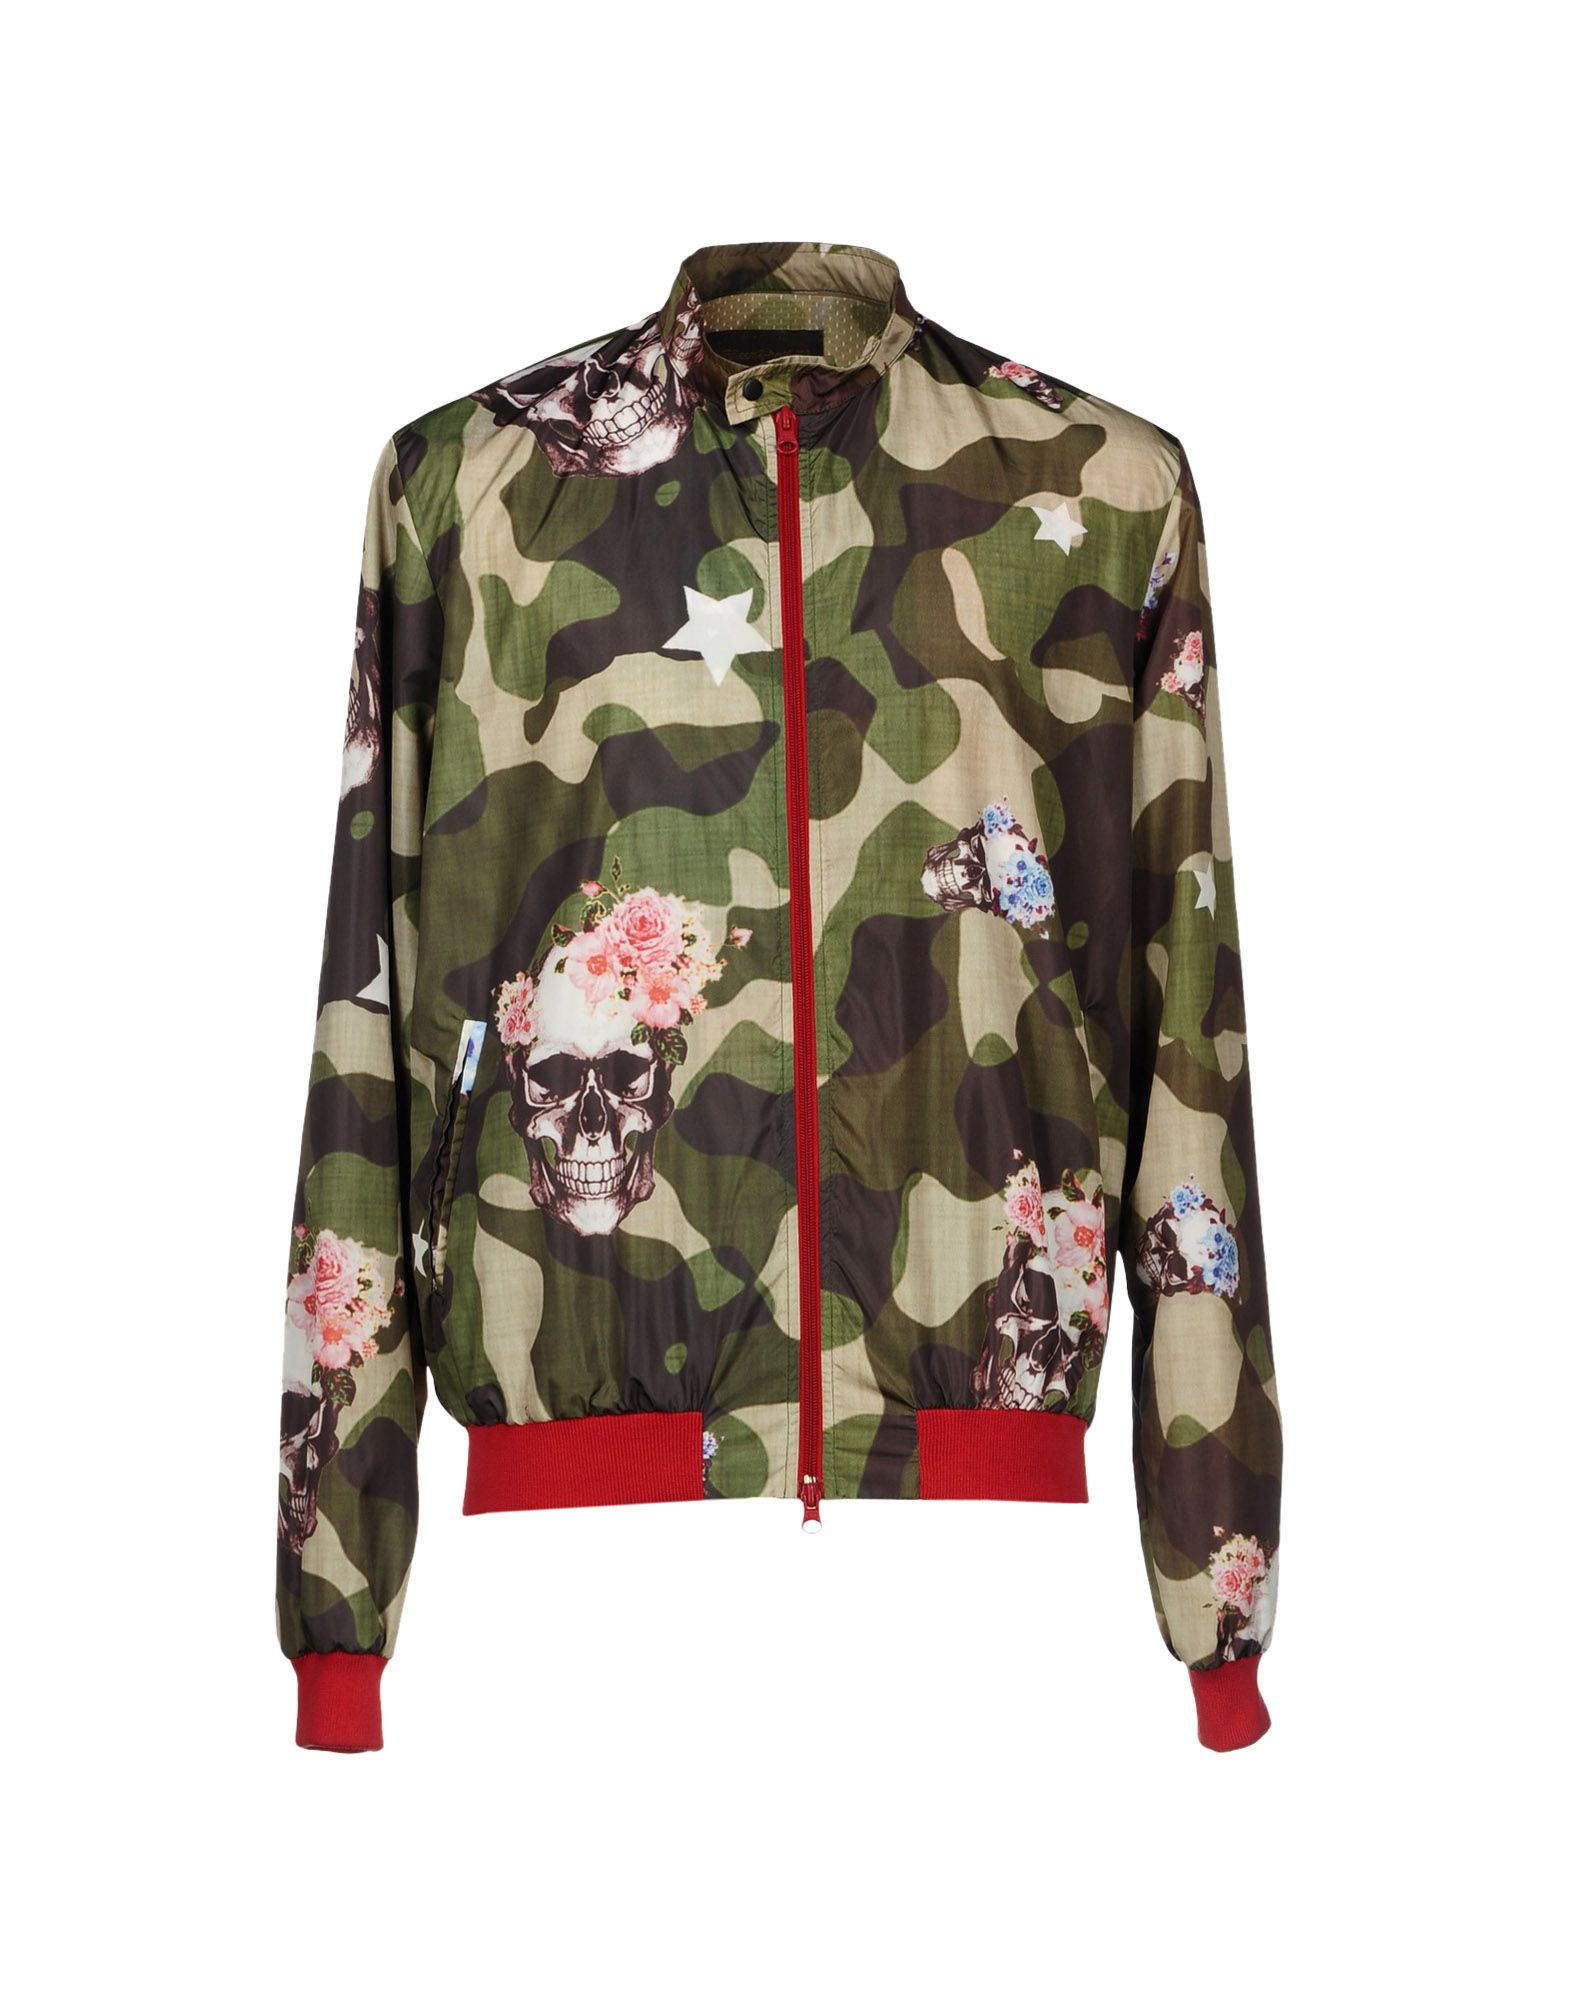 Lyst - Fifteen & Half Camouflage-Print Casual Jacket in Green for Men